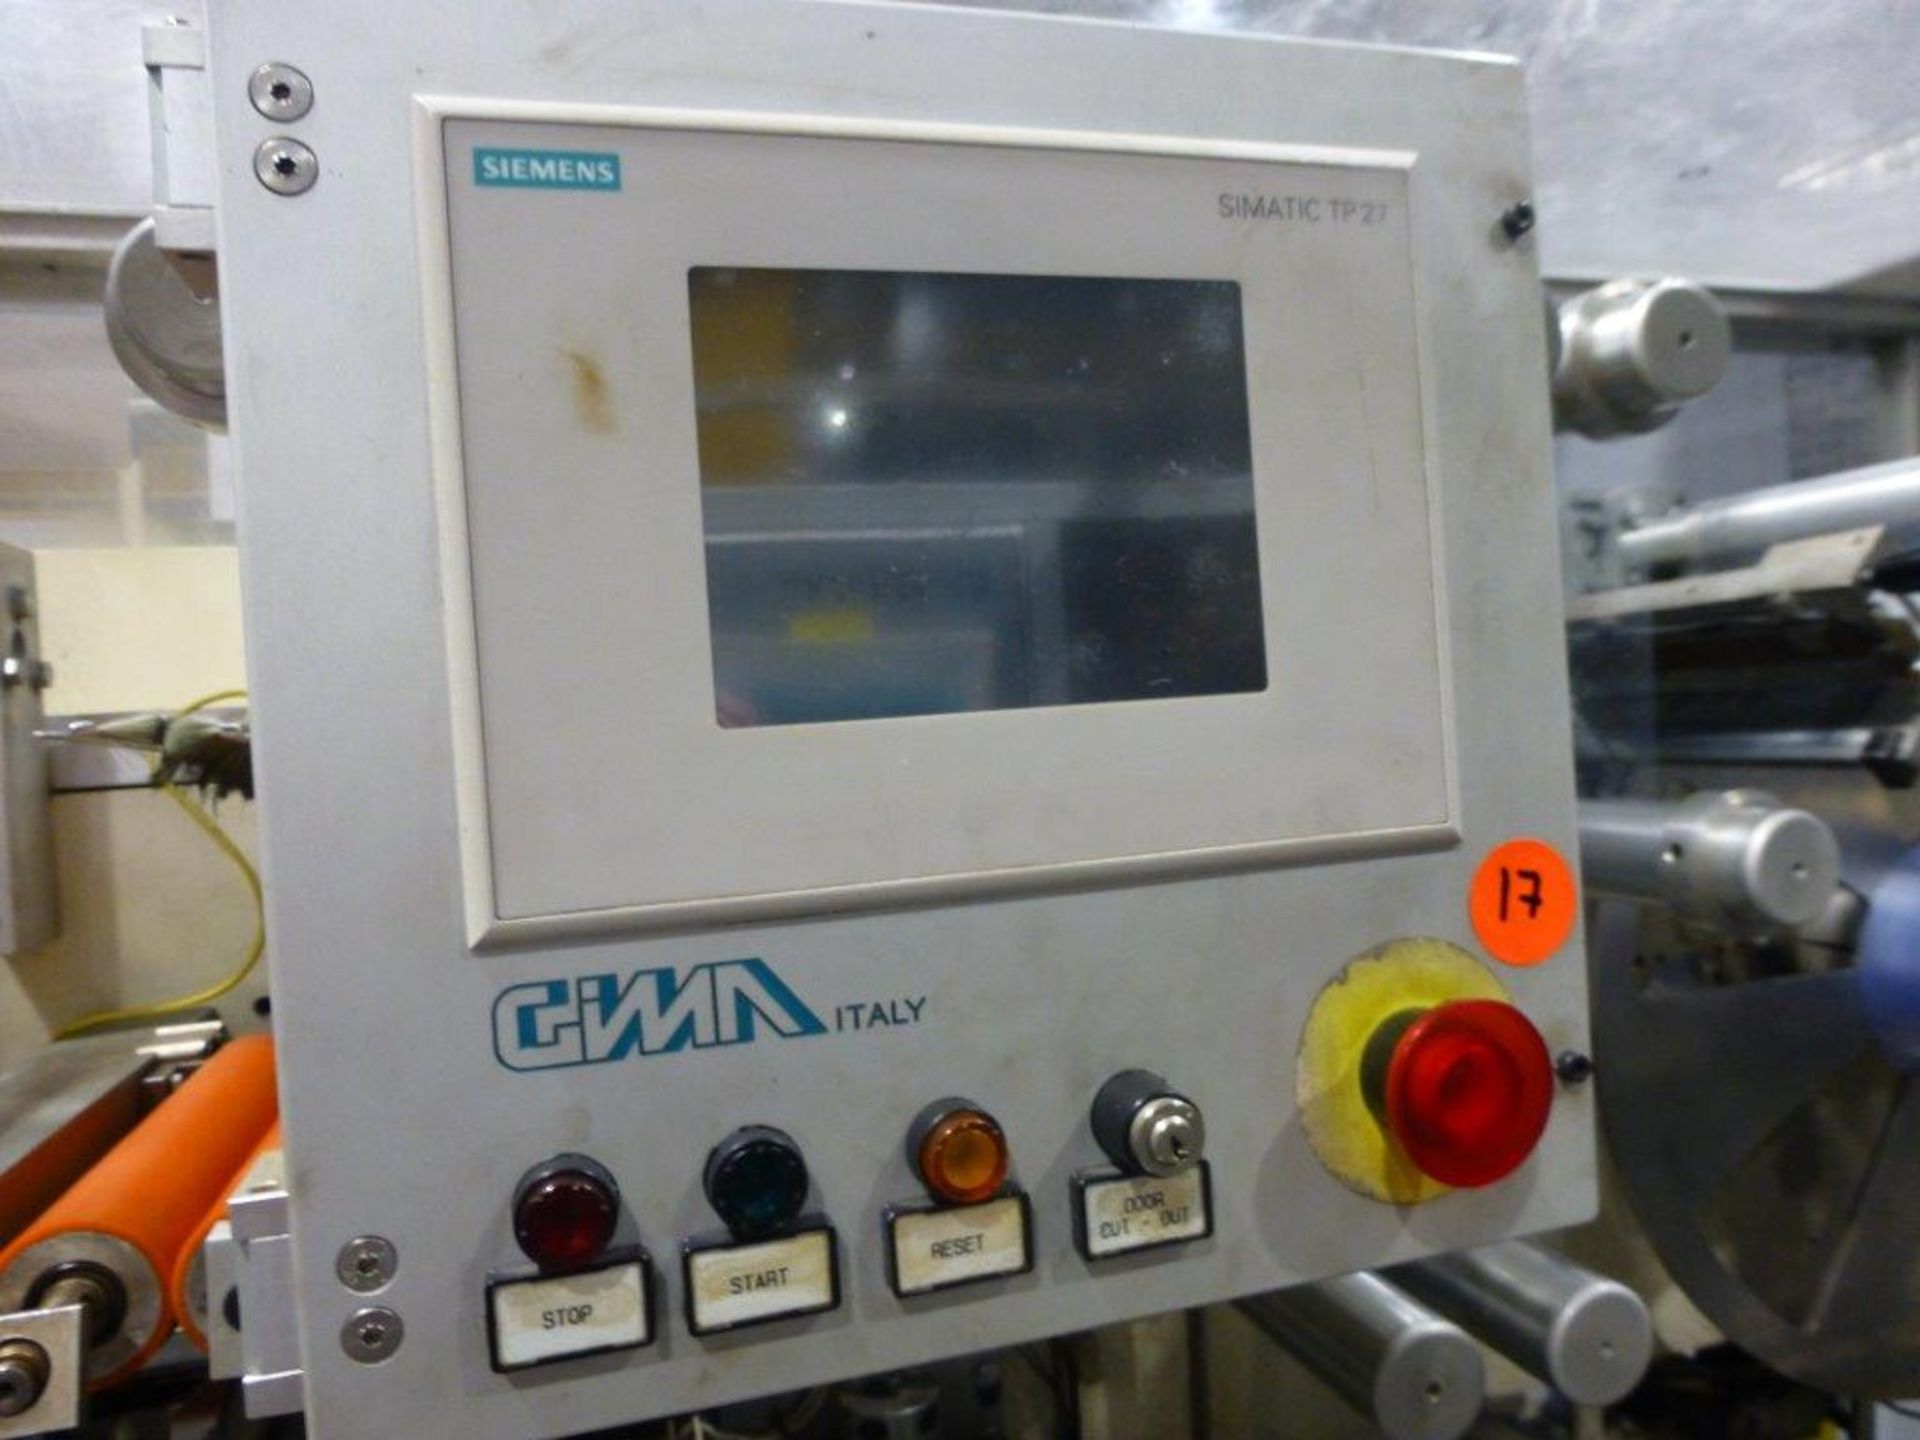 GIMA Type 884 DVD CNC Rotary Thermal Welding Machine Serial No. 88455FO (2003) with turnover unit. - Bild 4 aus 5